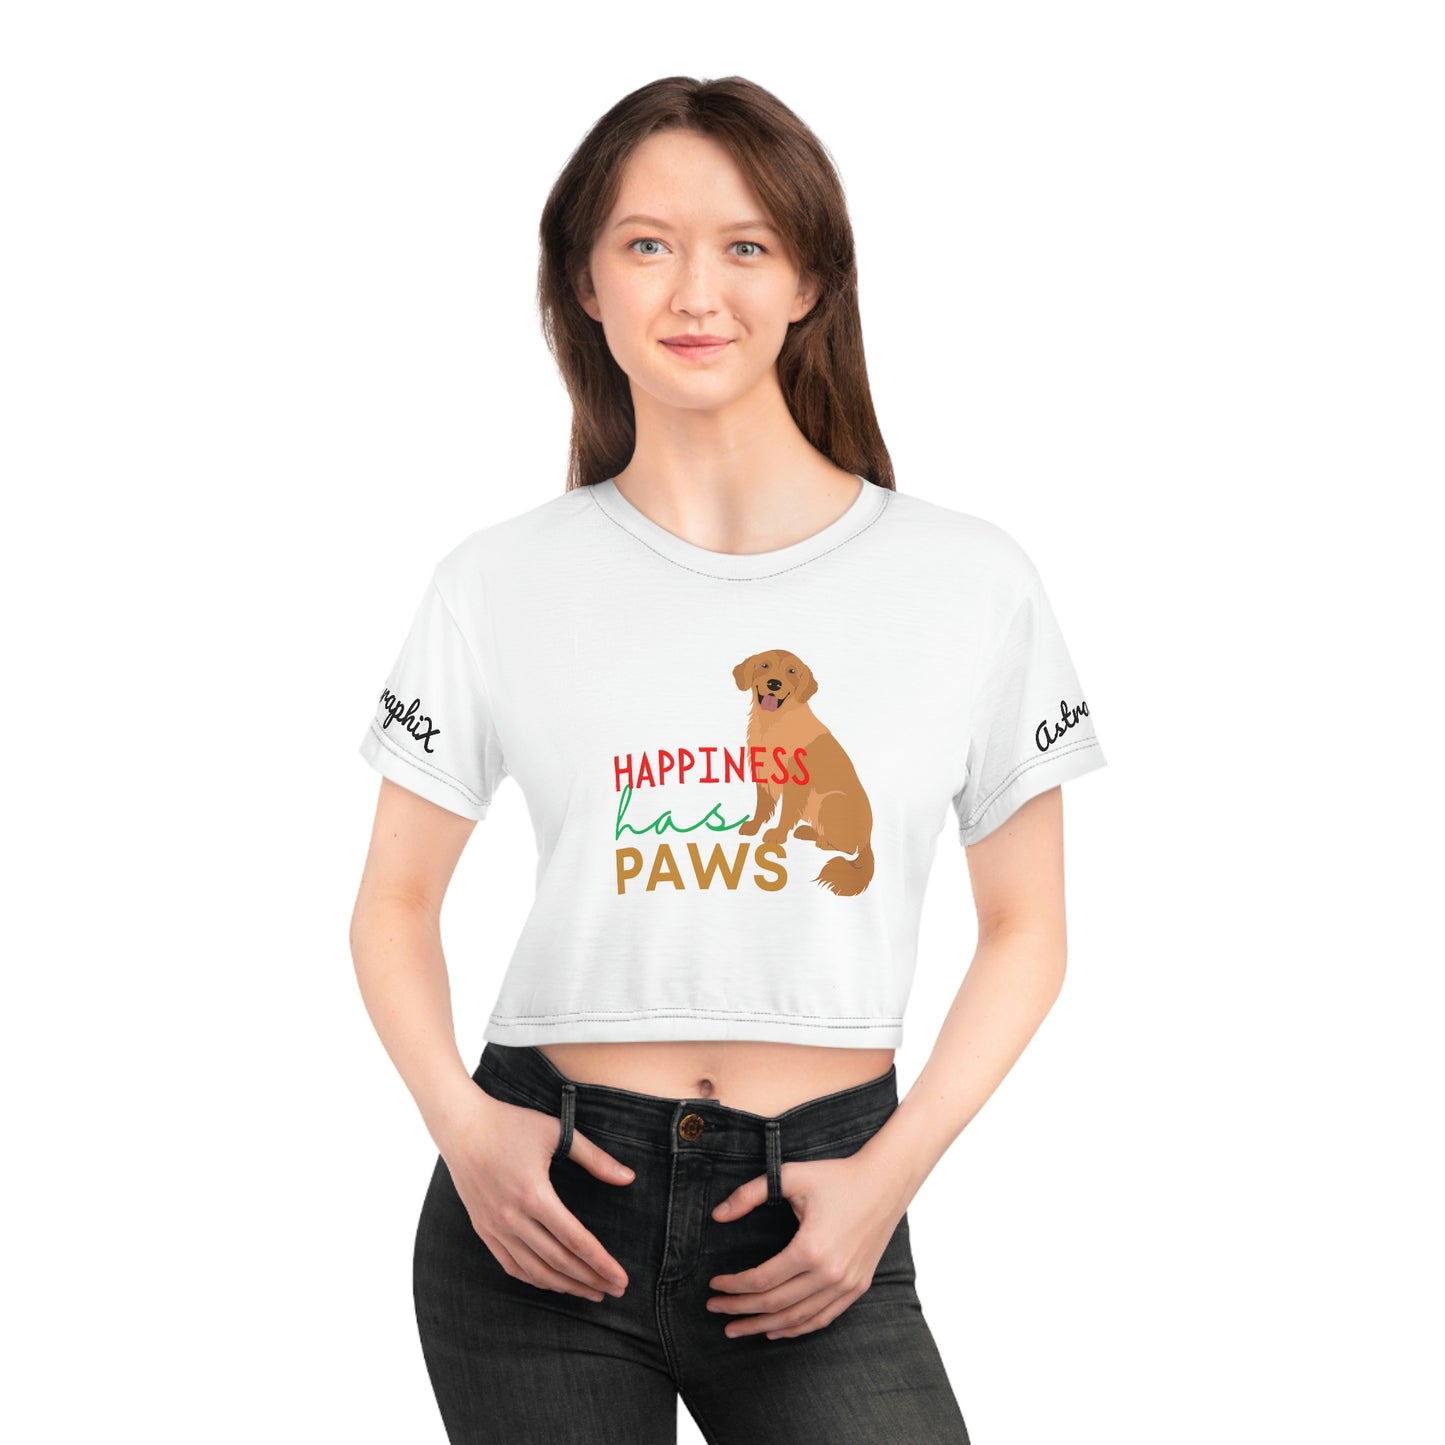 Animal Collection - AOP Crop Tee - Has Paws v2 in White